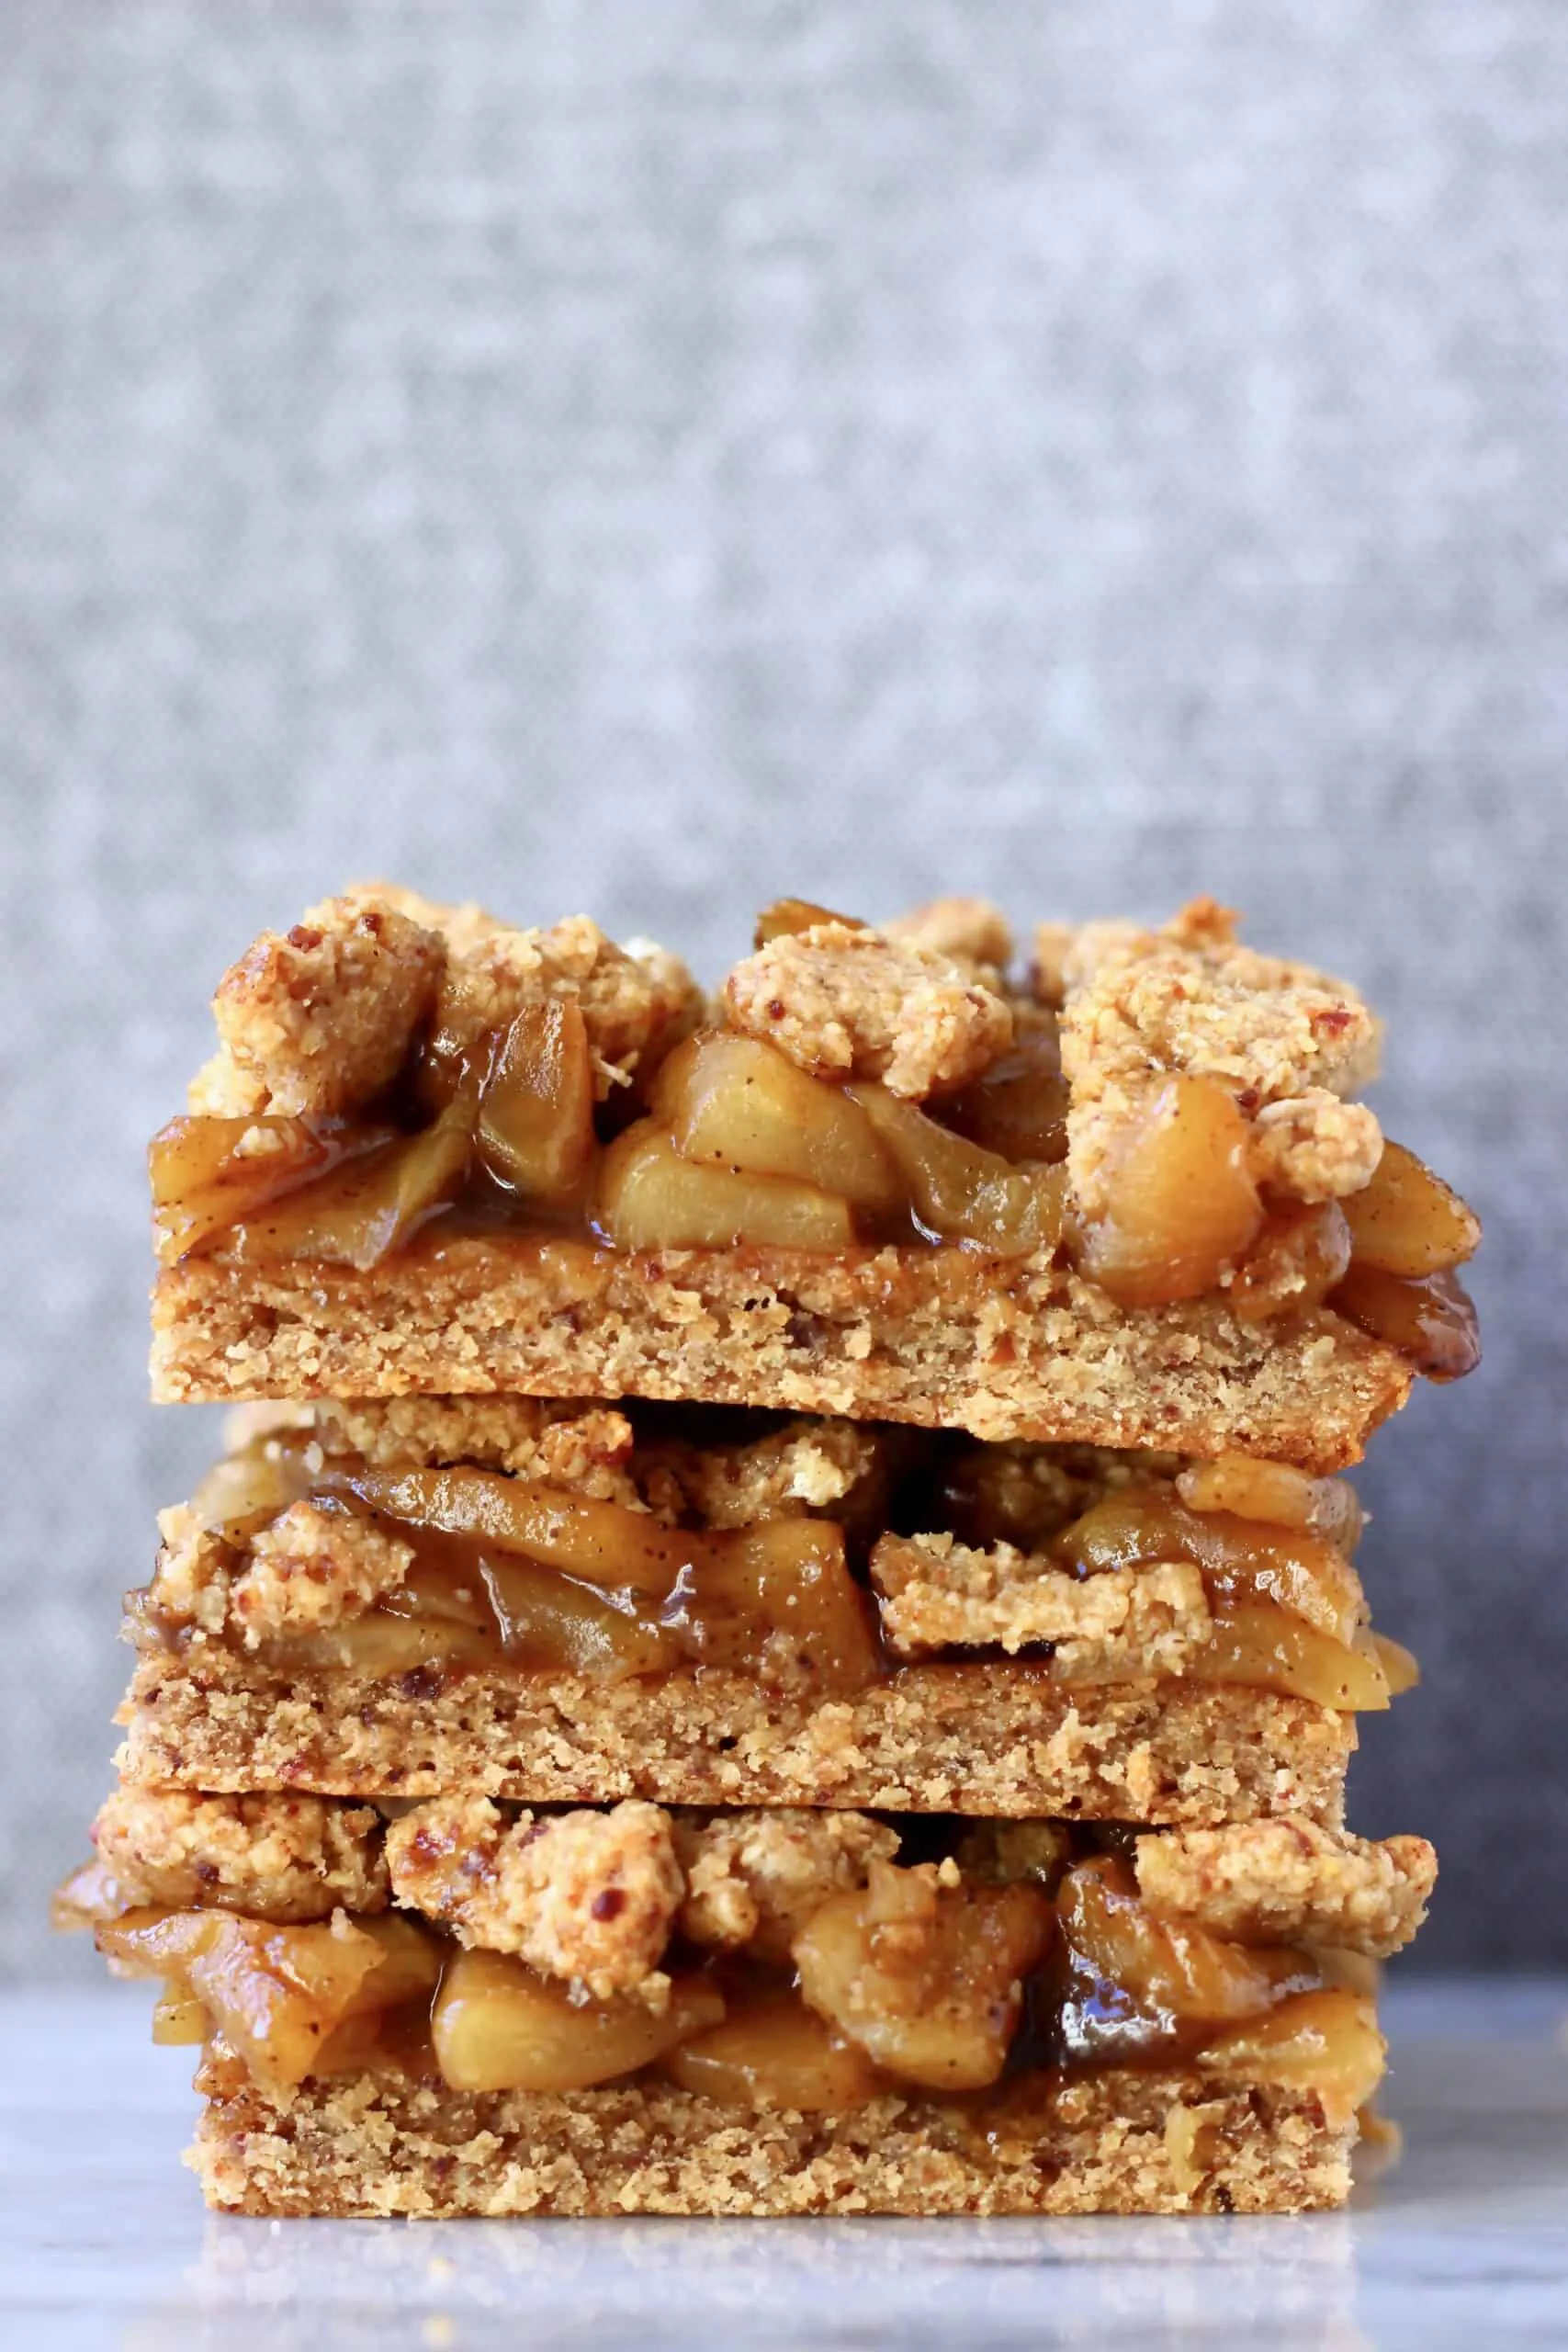 A stack of three gluten-free vegan apple crumble bars on a marble slab against a grey background